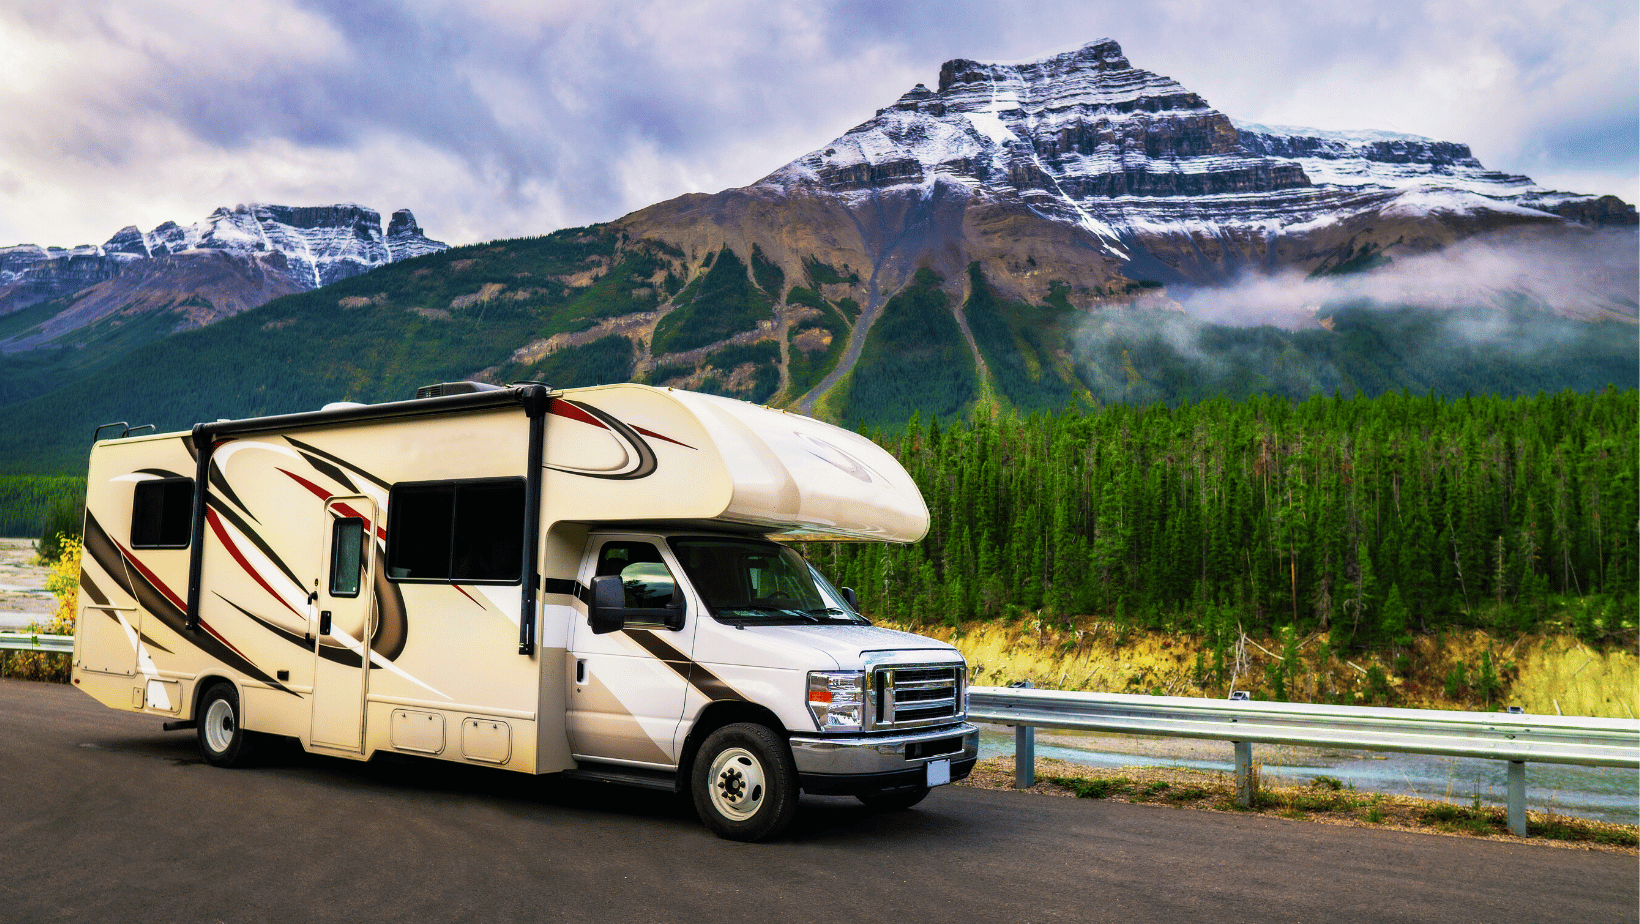 8 Essential Tips to Tune Up Your RV for the Road